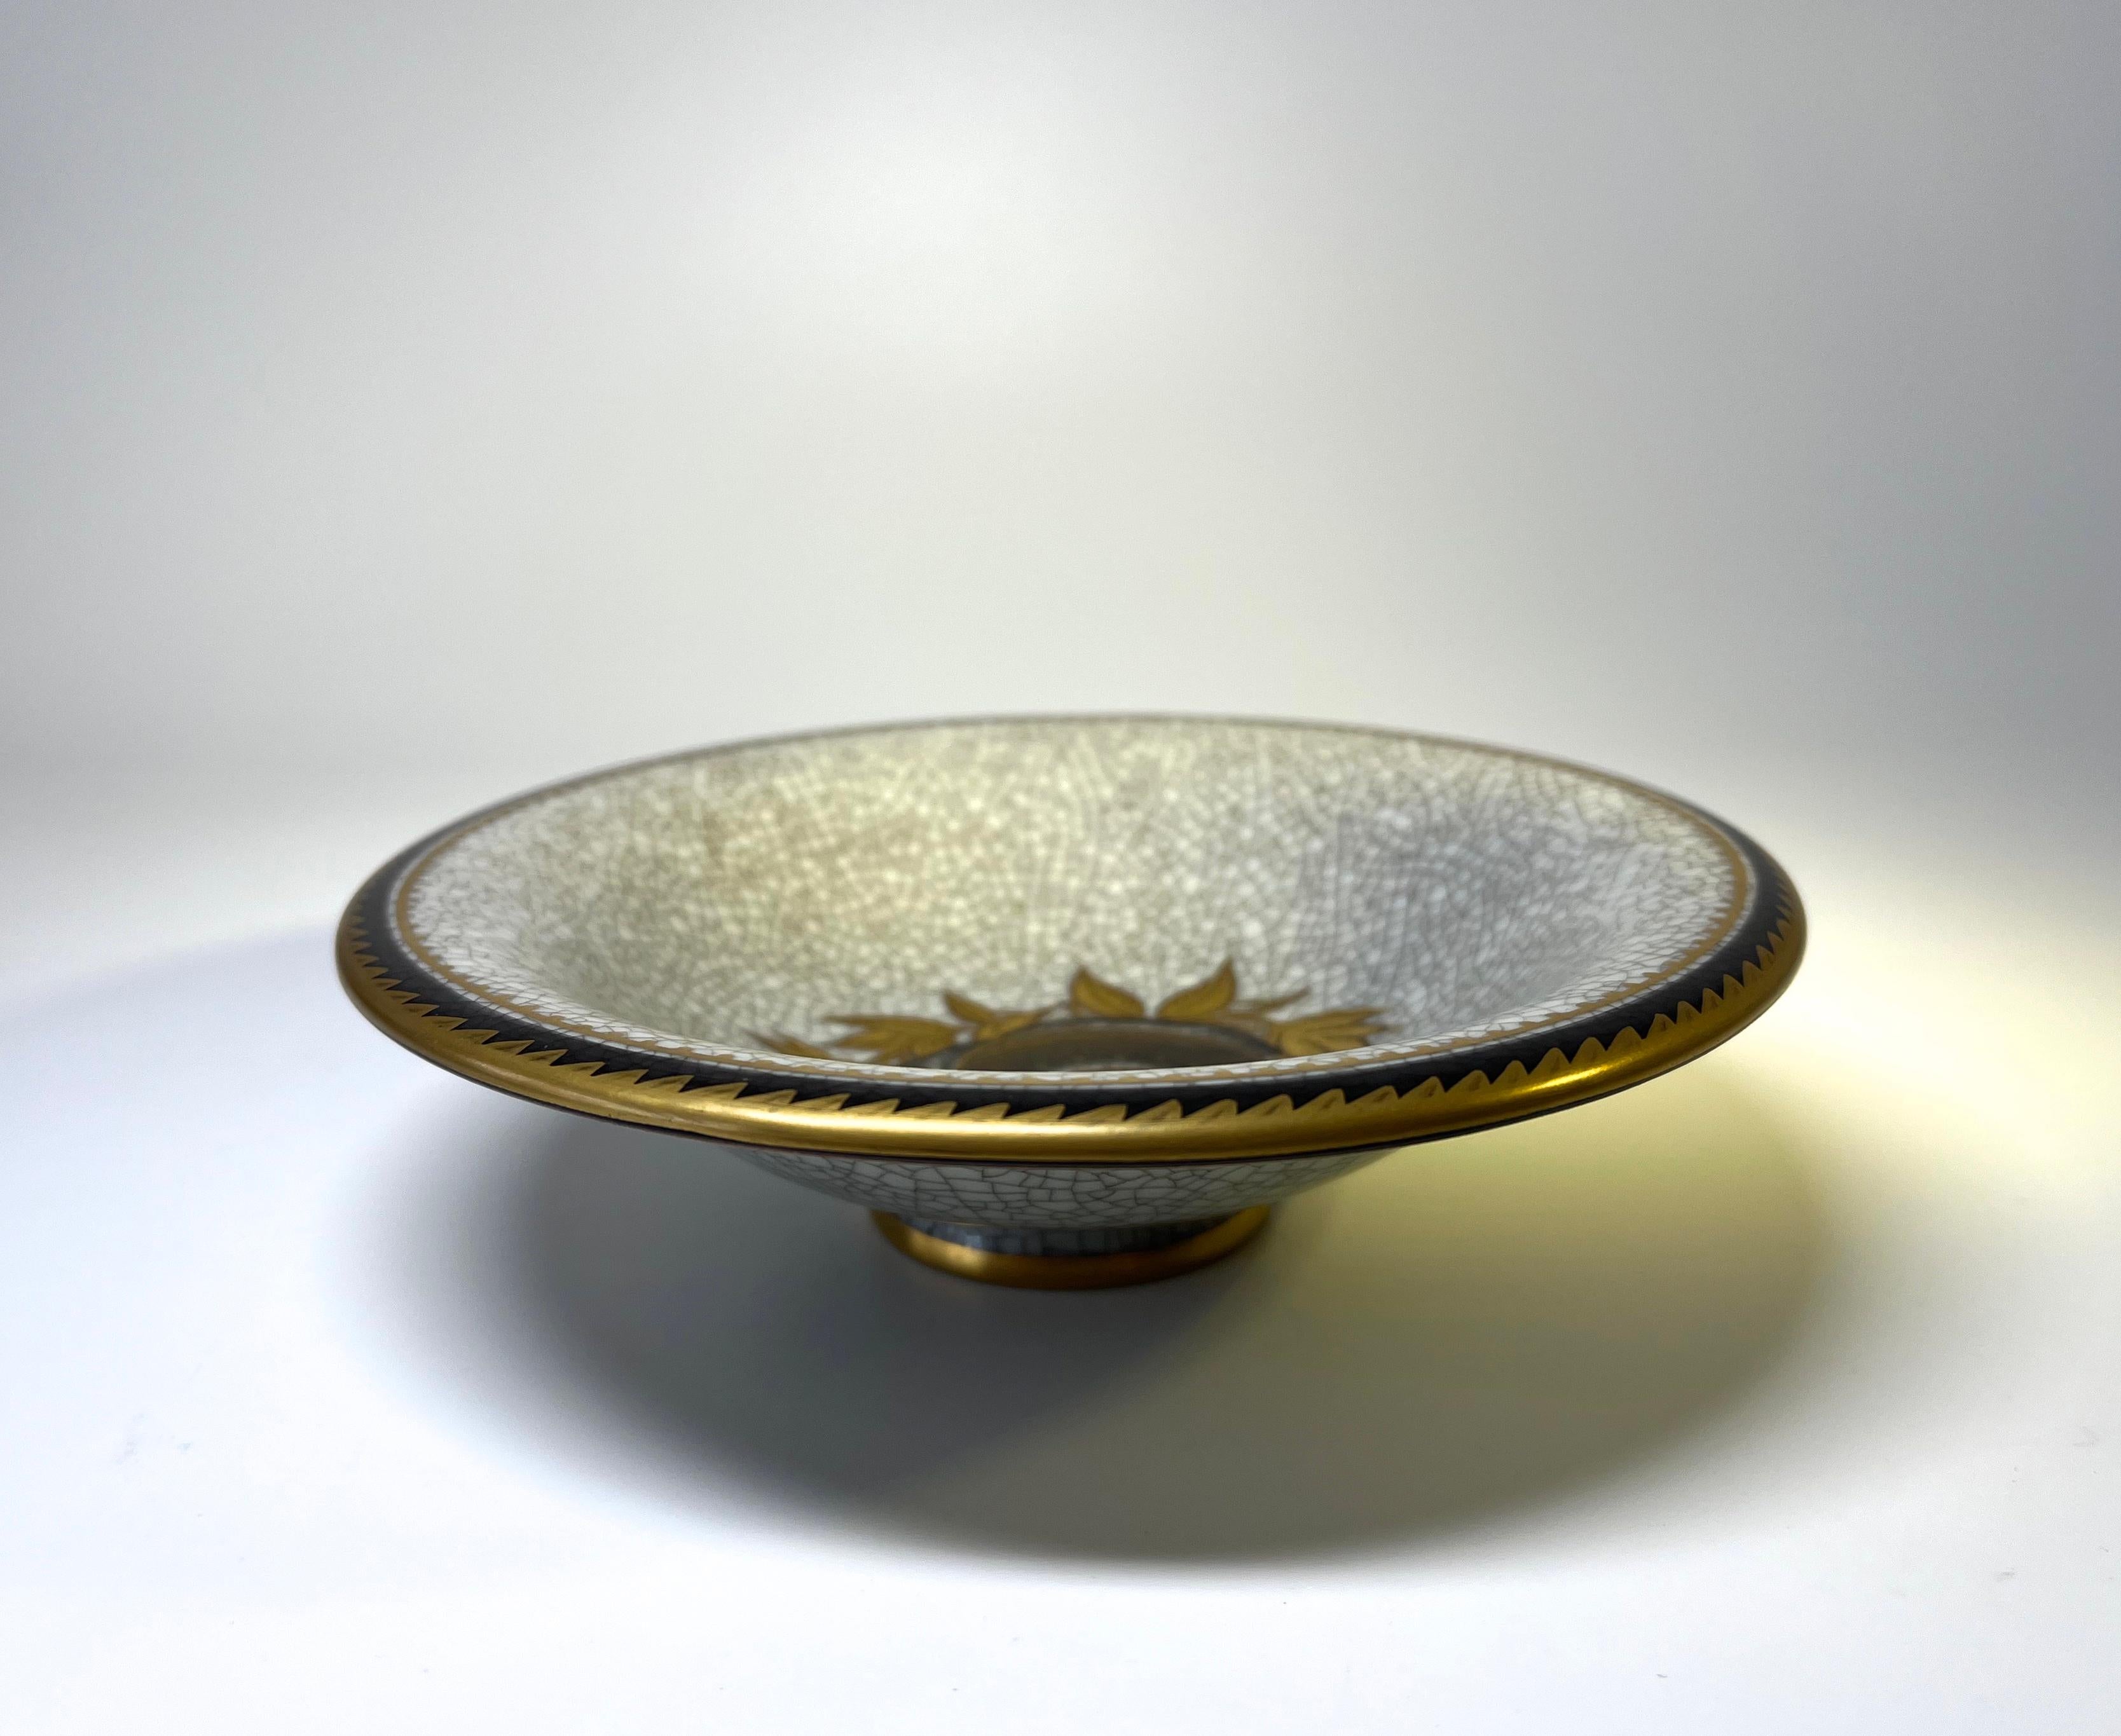 Royal Copenhagen grey crackle glaze dish with a detailed central motif of a gilded snail and leaf garland
Outer has gilded banding to rim and foot
Stamped with signature three waves, Denmark and numbered #2520
Height 1.5 inch, Diameter 5.75